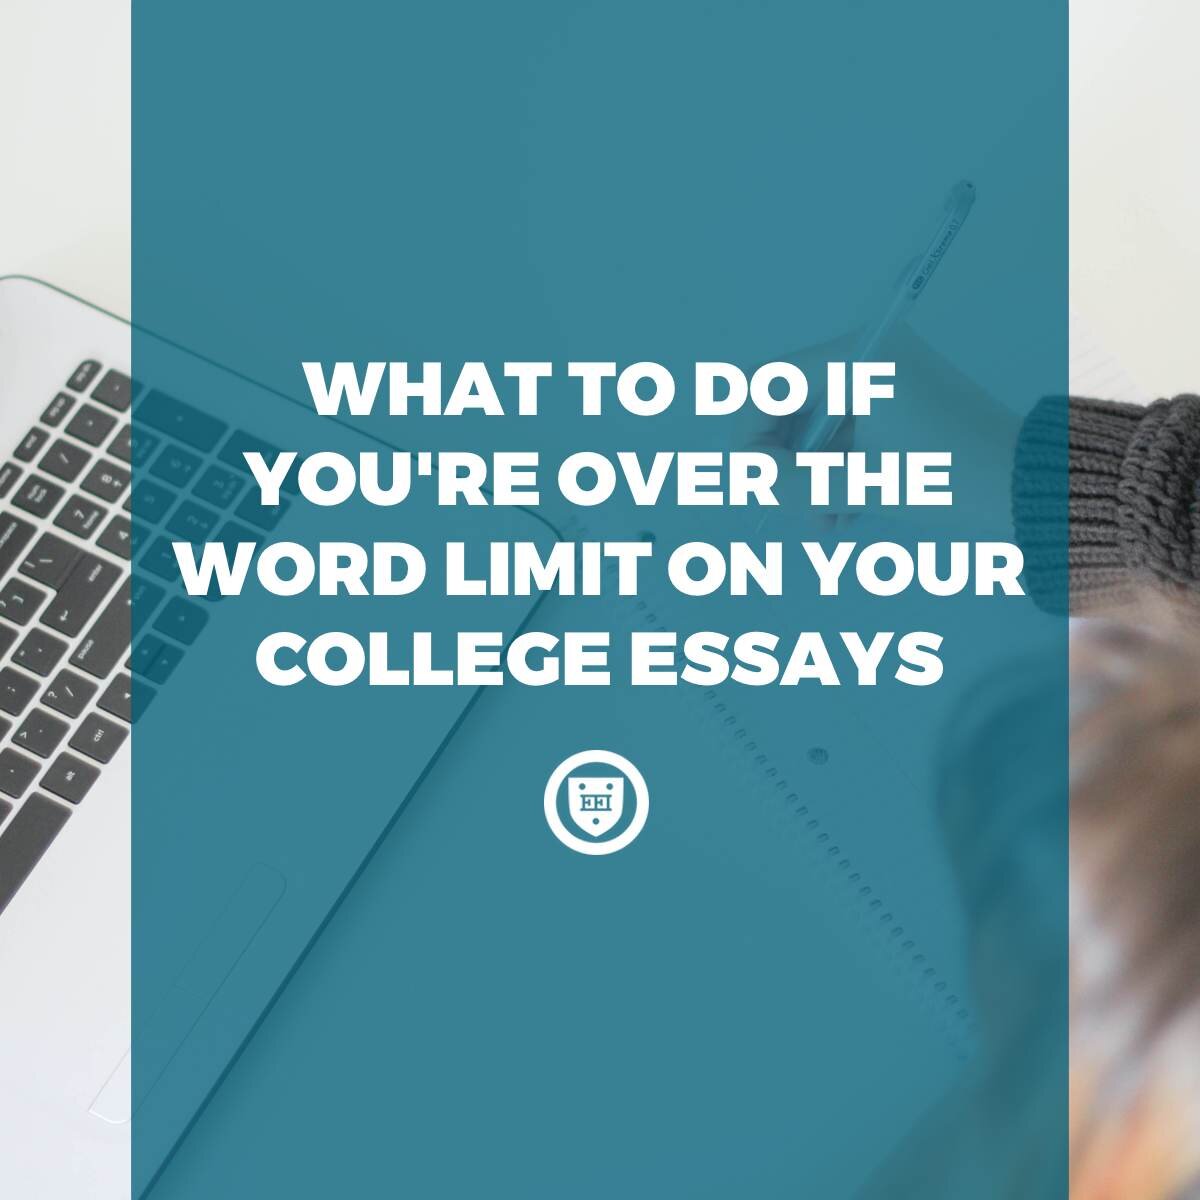 What to Do If You're Over the Word Limit on Your Admissions Essays